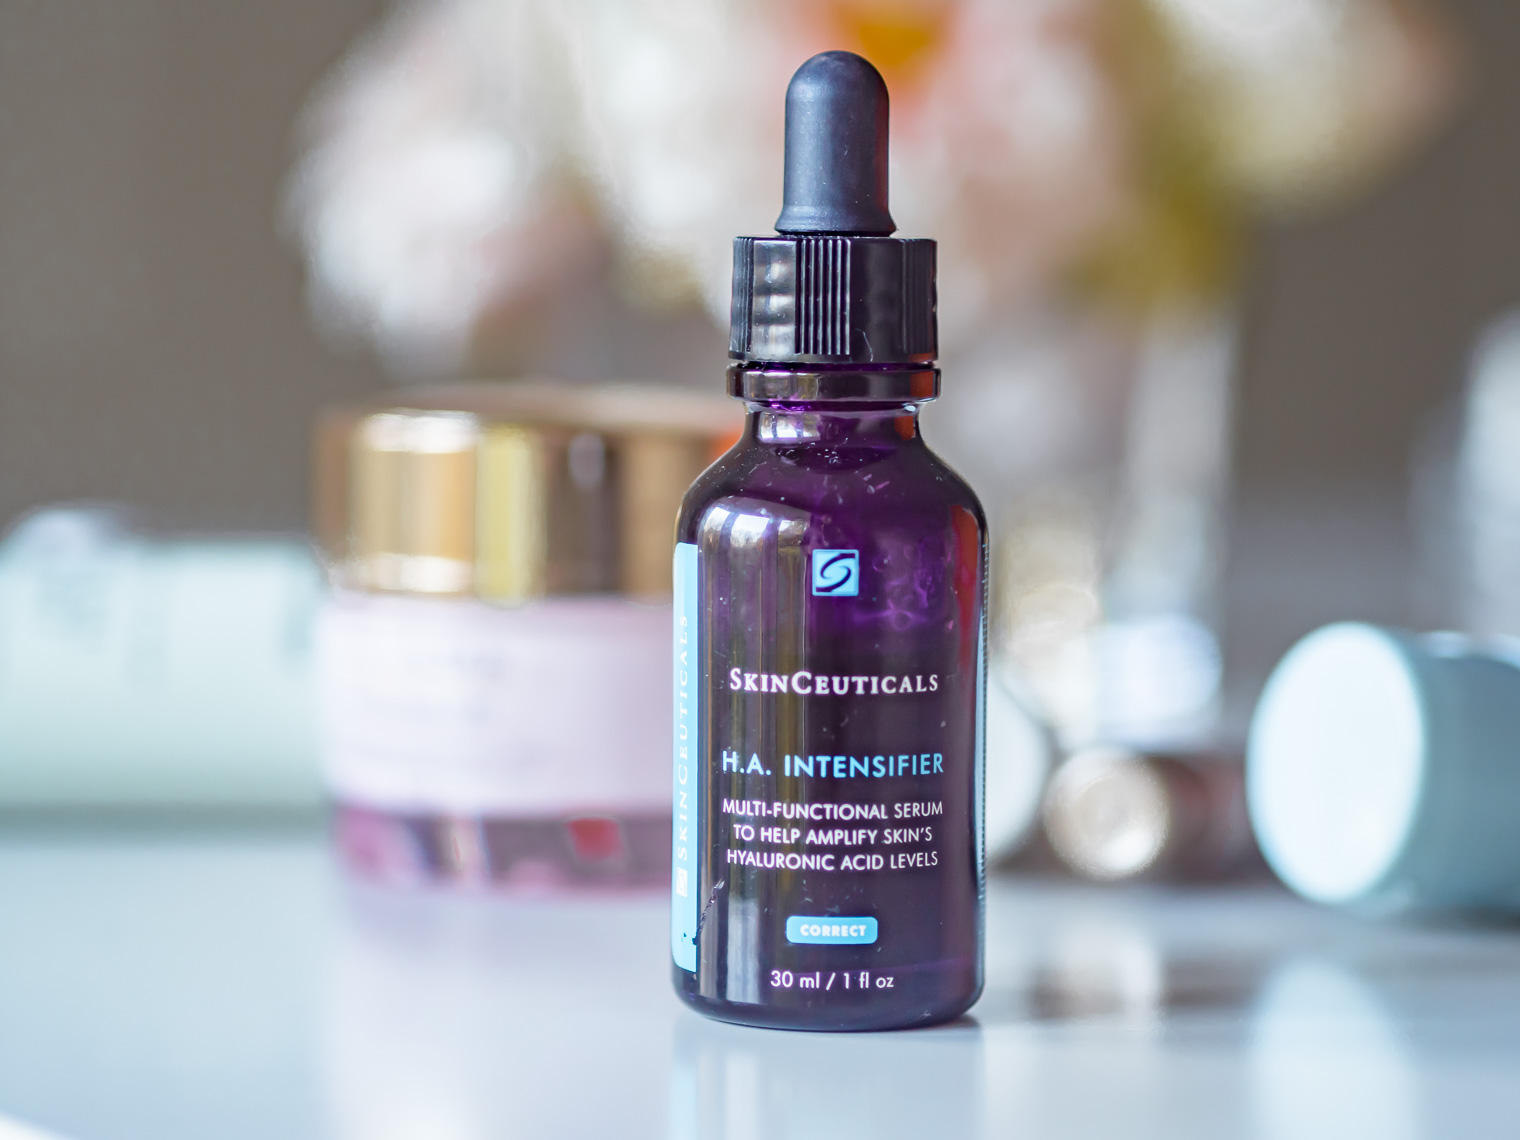 Skinceuticals H.A. intesifier keeping skin hydrated on a plane